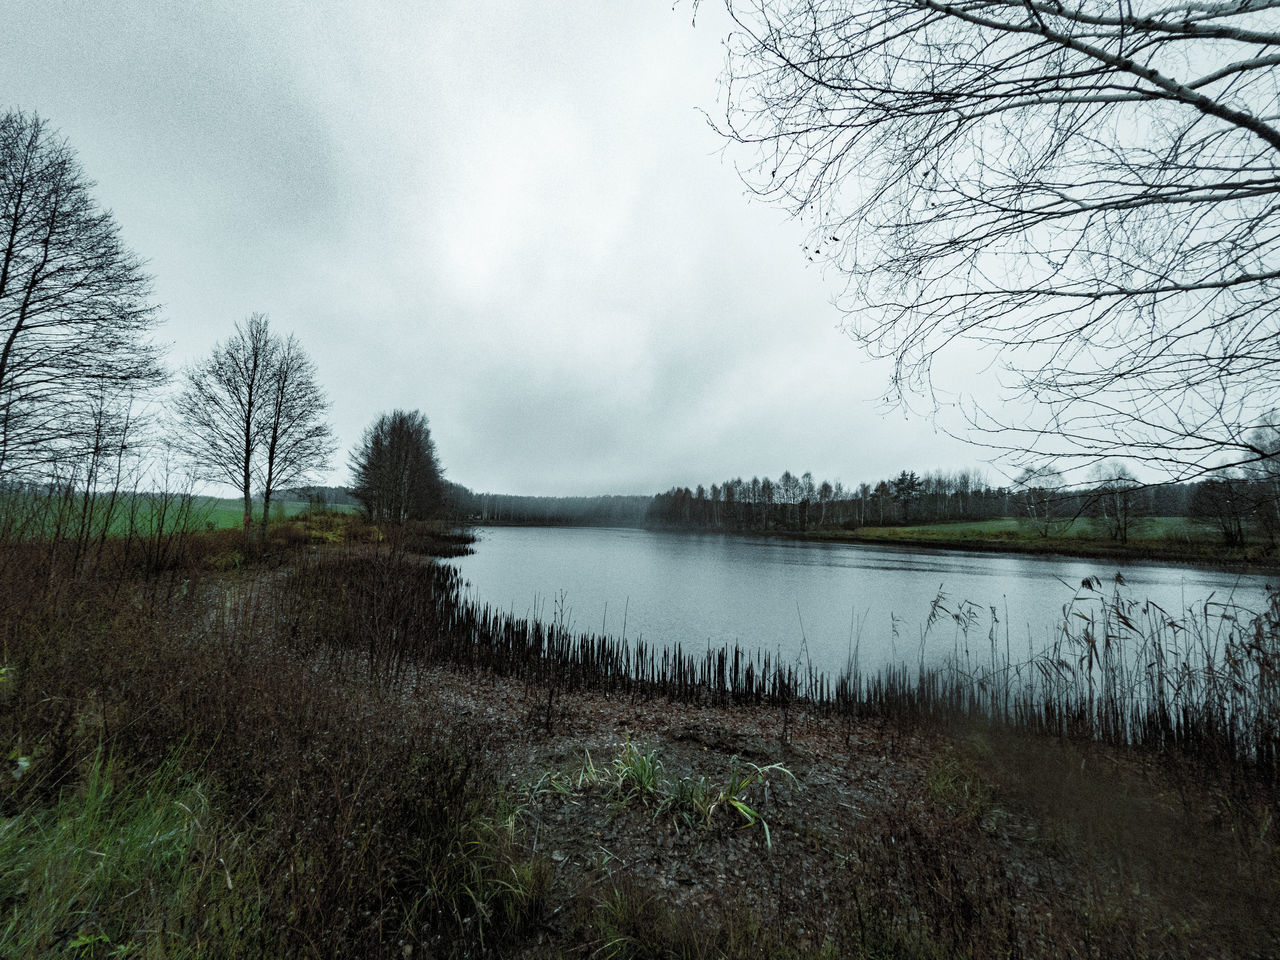 water, nature, tree, plant, sky, lake, cloud, tranquility, scenics - nature, reflection, beauty in nature, tranquil scene, environment, no people, landscape, bare tree, land, non-urban scene, wetland, morning, body of water, grass, rural area, overcast, reservoir, forest, outdoors, wilderness, waterway, lakeshore, day, natural environment, travel destinations, fog, beach, idyllic, remote, tourism